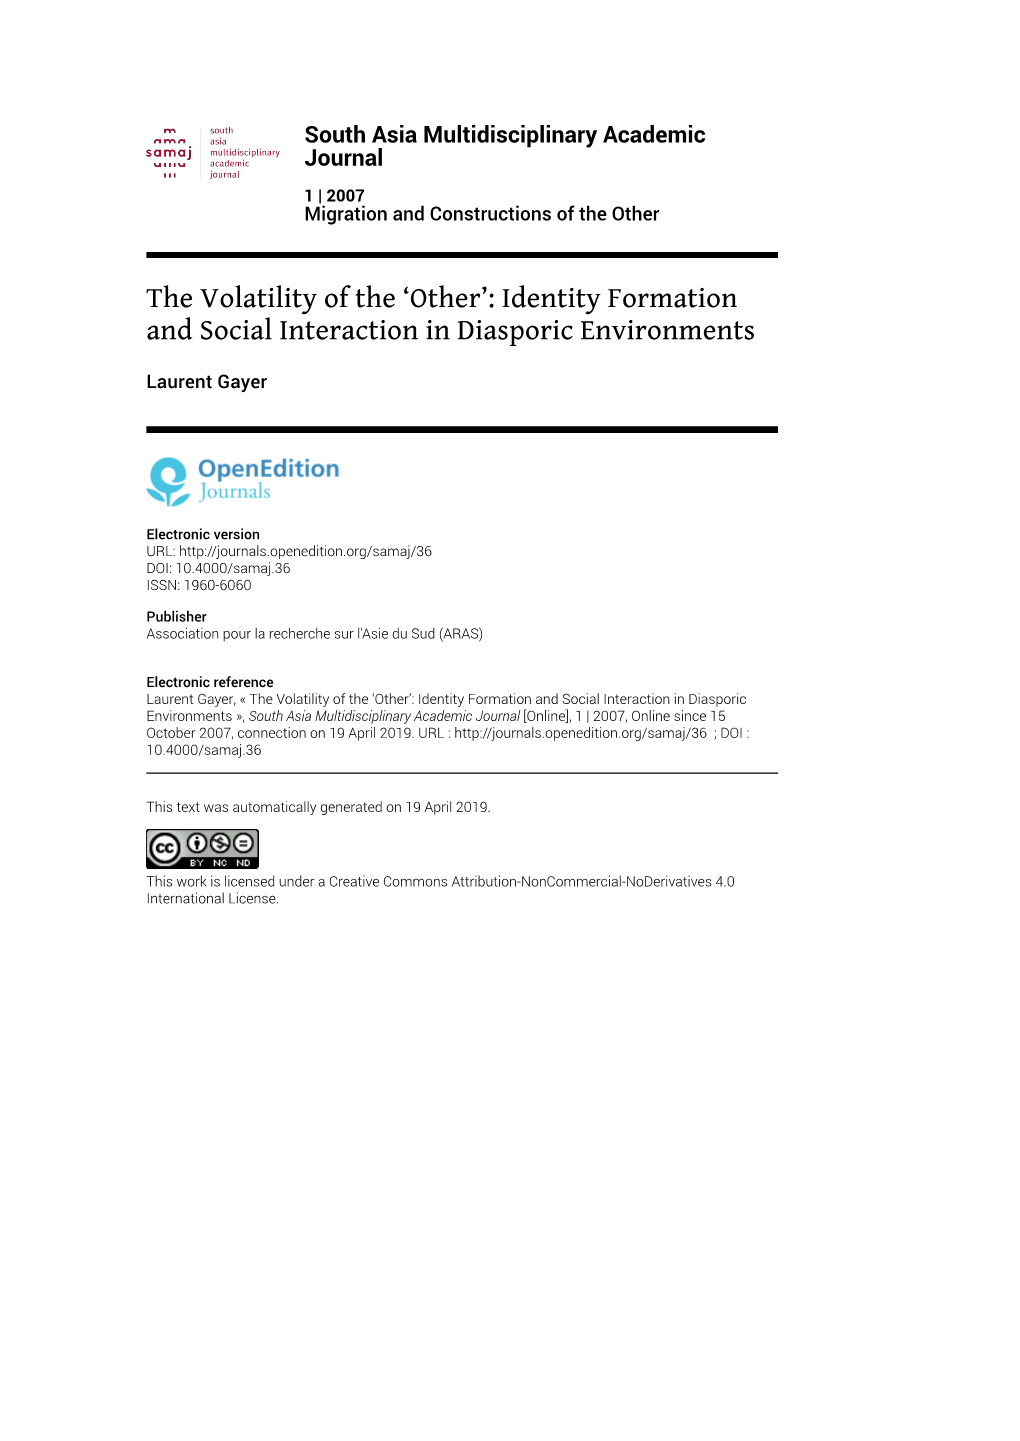 South Asia Multidisciplinary Academic Journal, 1 | 2007 the Volatility of the ‘Other’: Identity Formation and Social Interaction in D